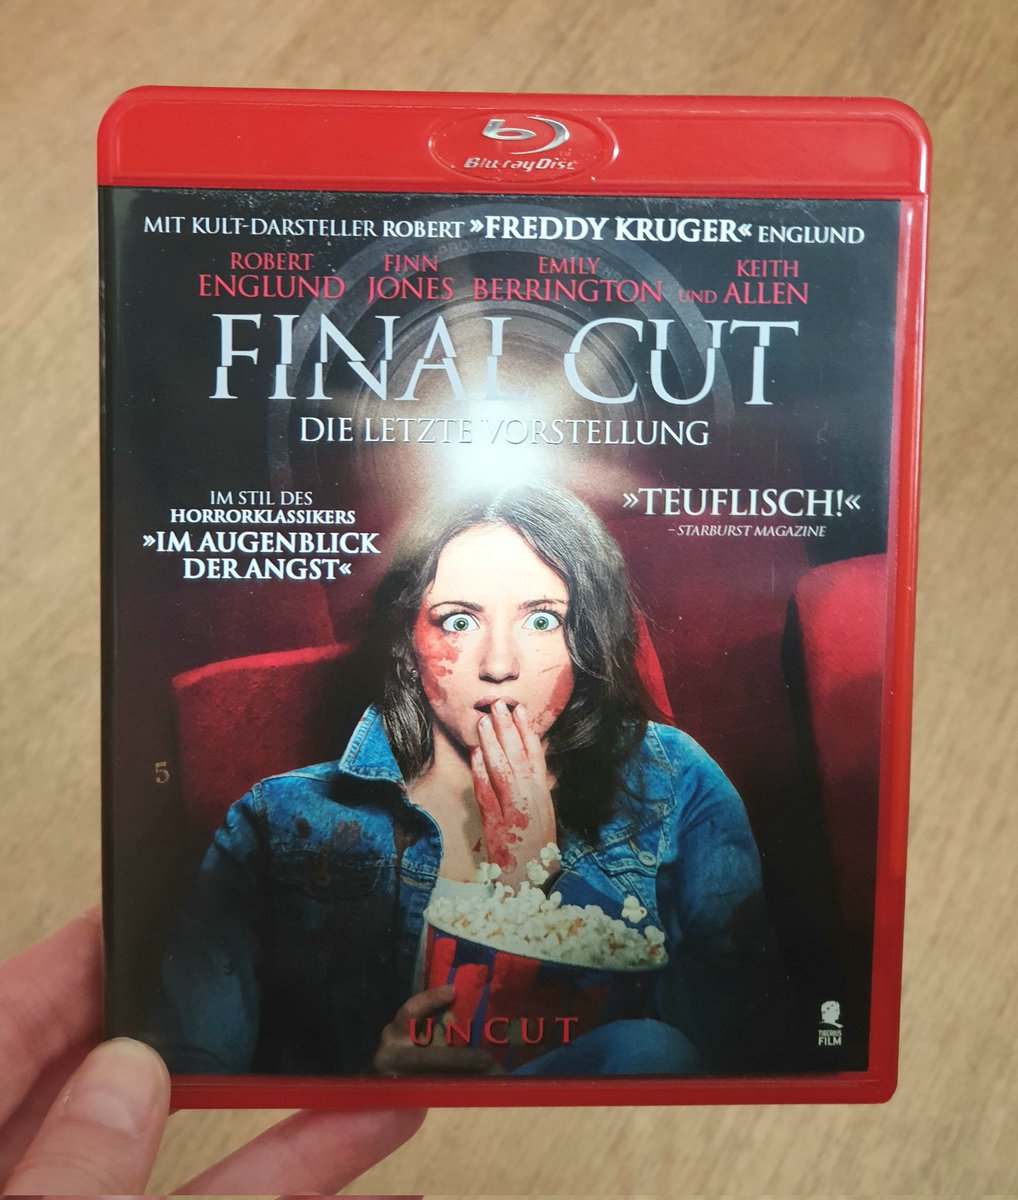 #FinalCutDieLetzteVorstellung (#TheLastShowing) directed by Phil Hawkins is a great, exciting & very underrated independent horror / thriller movie with a fantastic story & a brilliant cast. 
#RobertEnglund #FinnJones #EmilyBerrington #KeithAllen #ChrisGeere #MalachiKirby